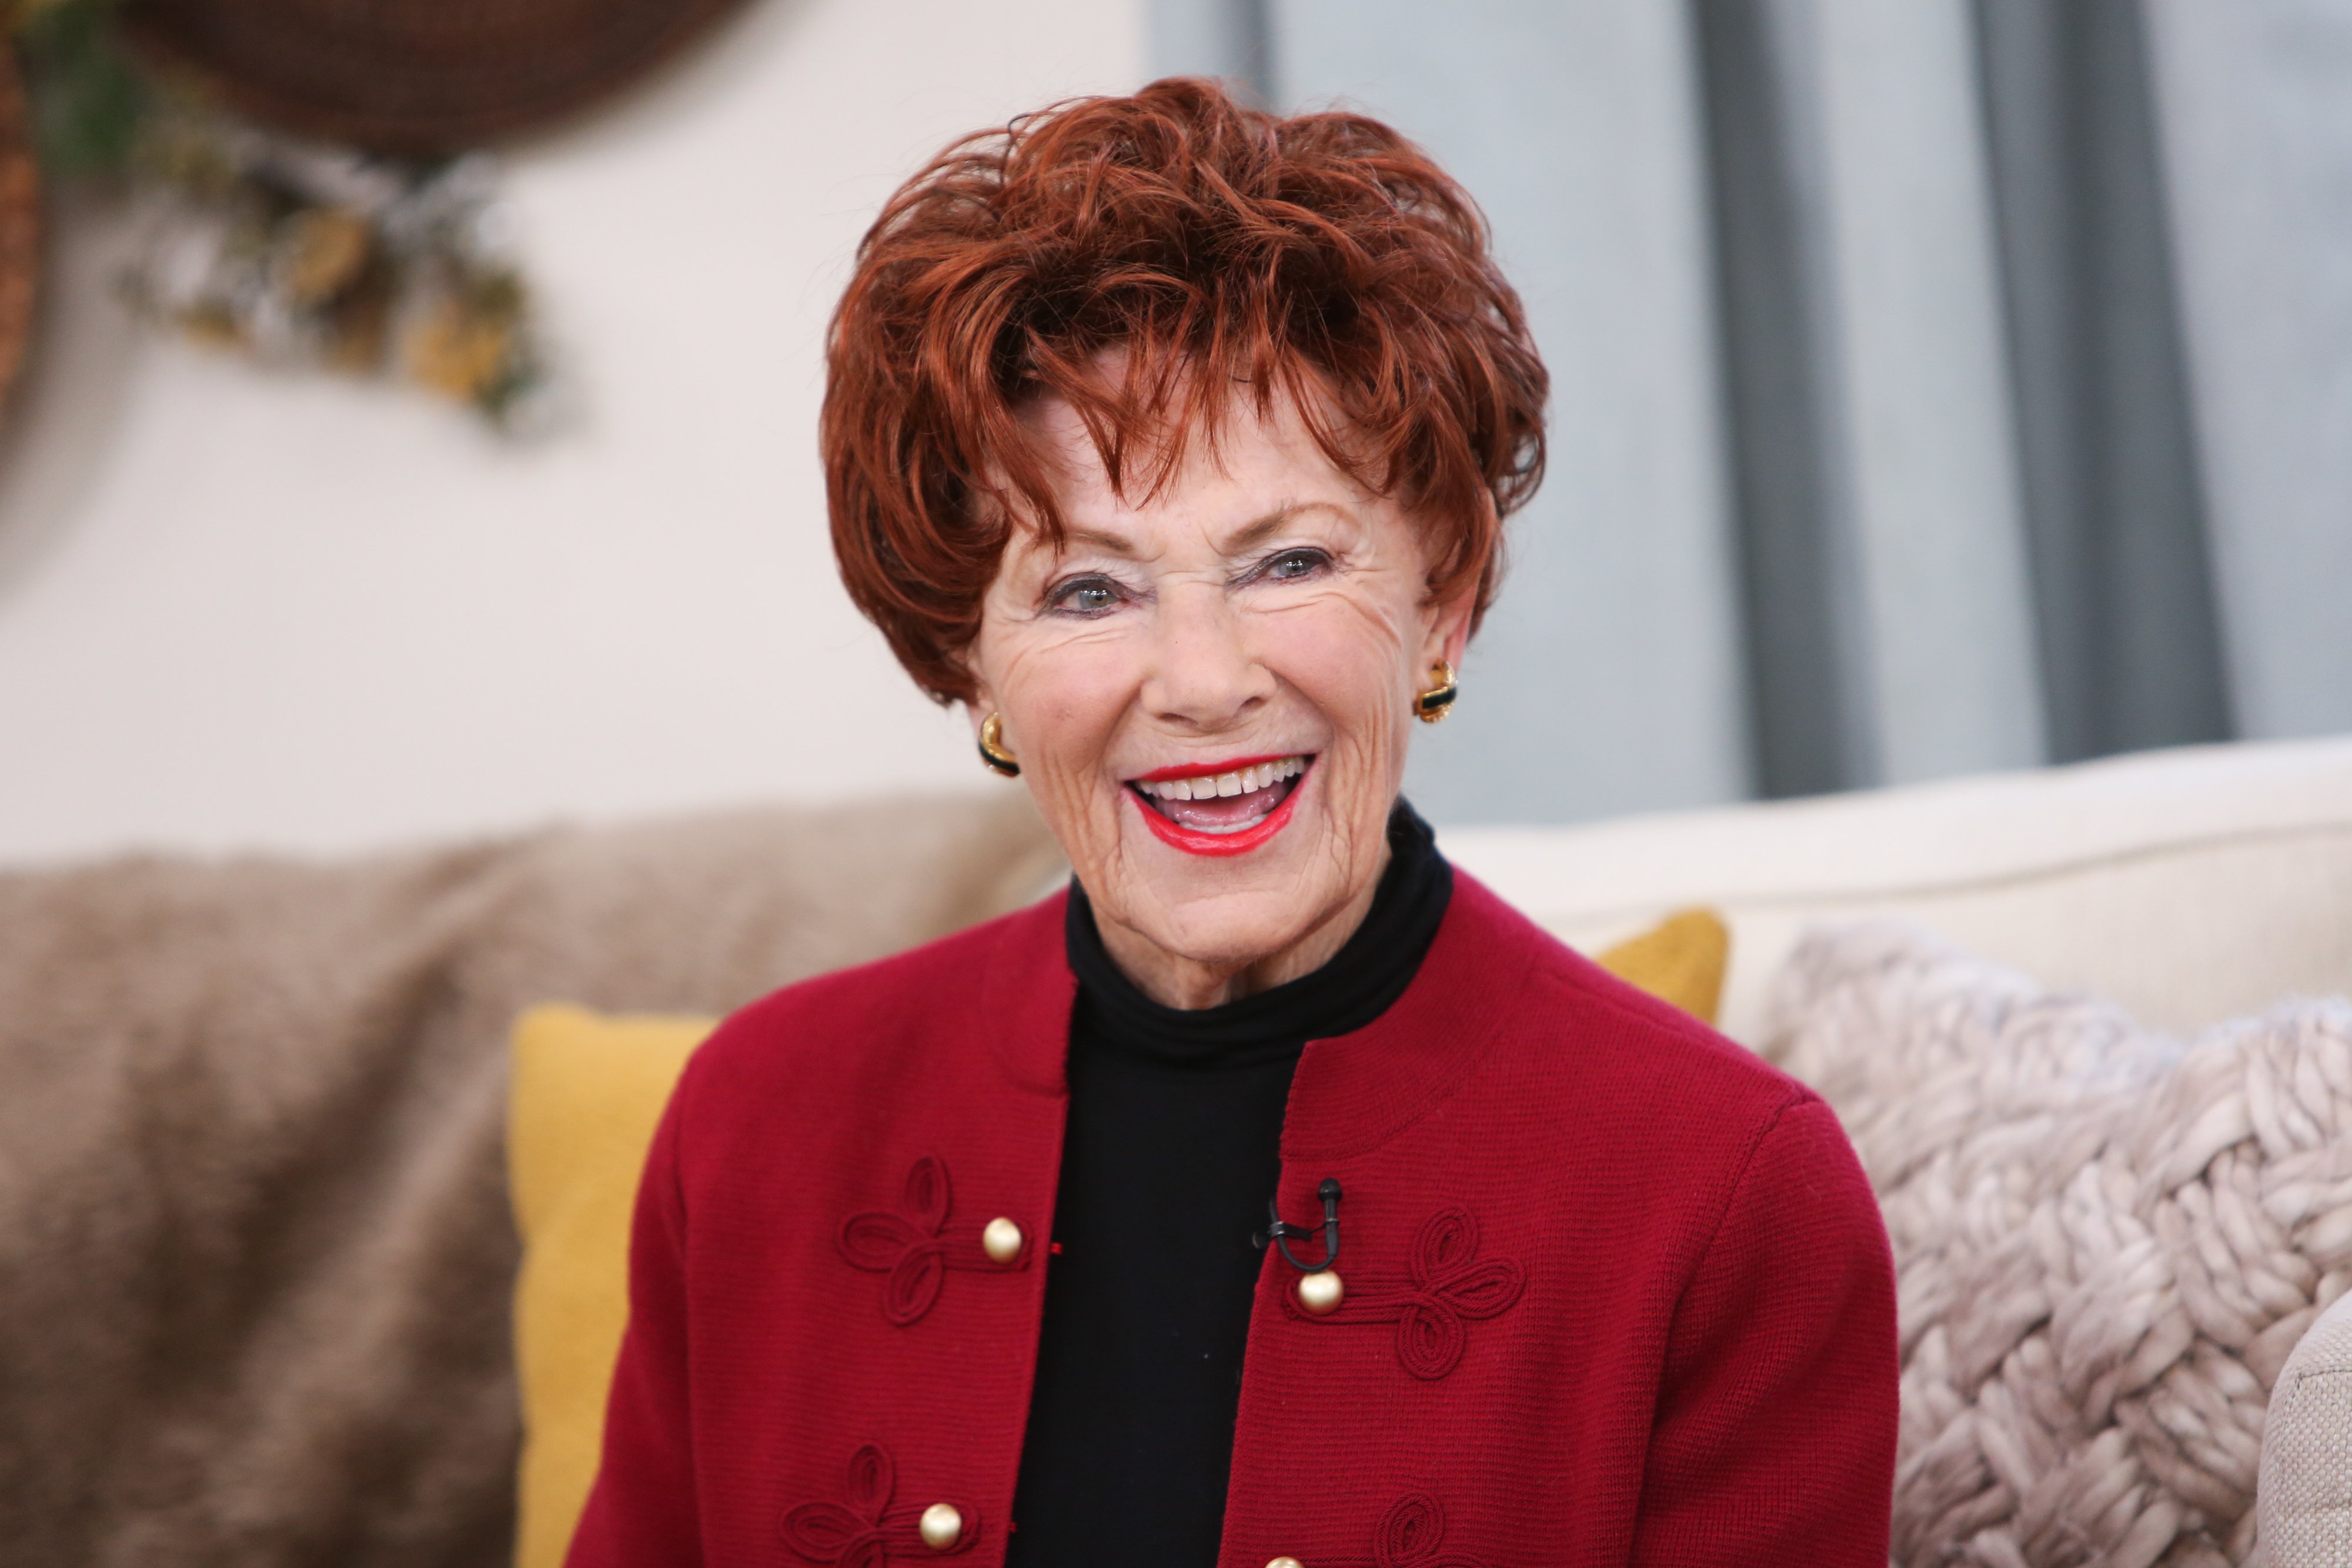 Marion Ross visits Hallmark's "Home & Family" at Universal Studios Hollywood on January 23, 2019 in Universal City, California | Photo: Getty Images